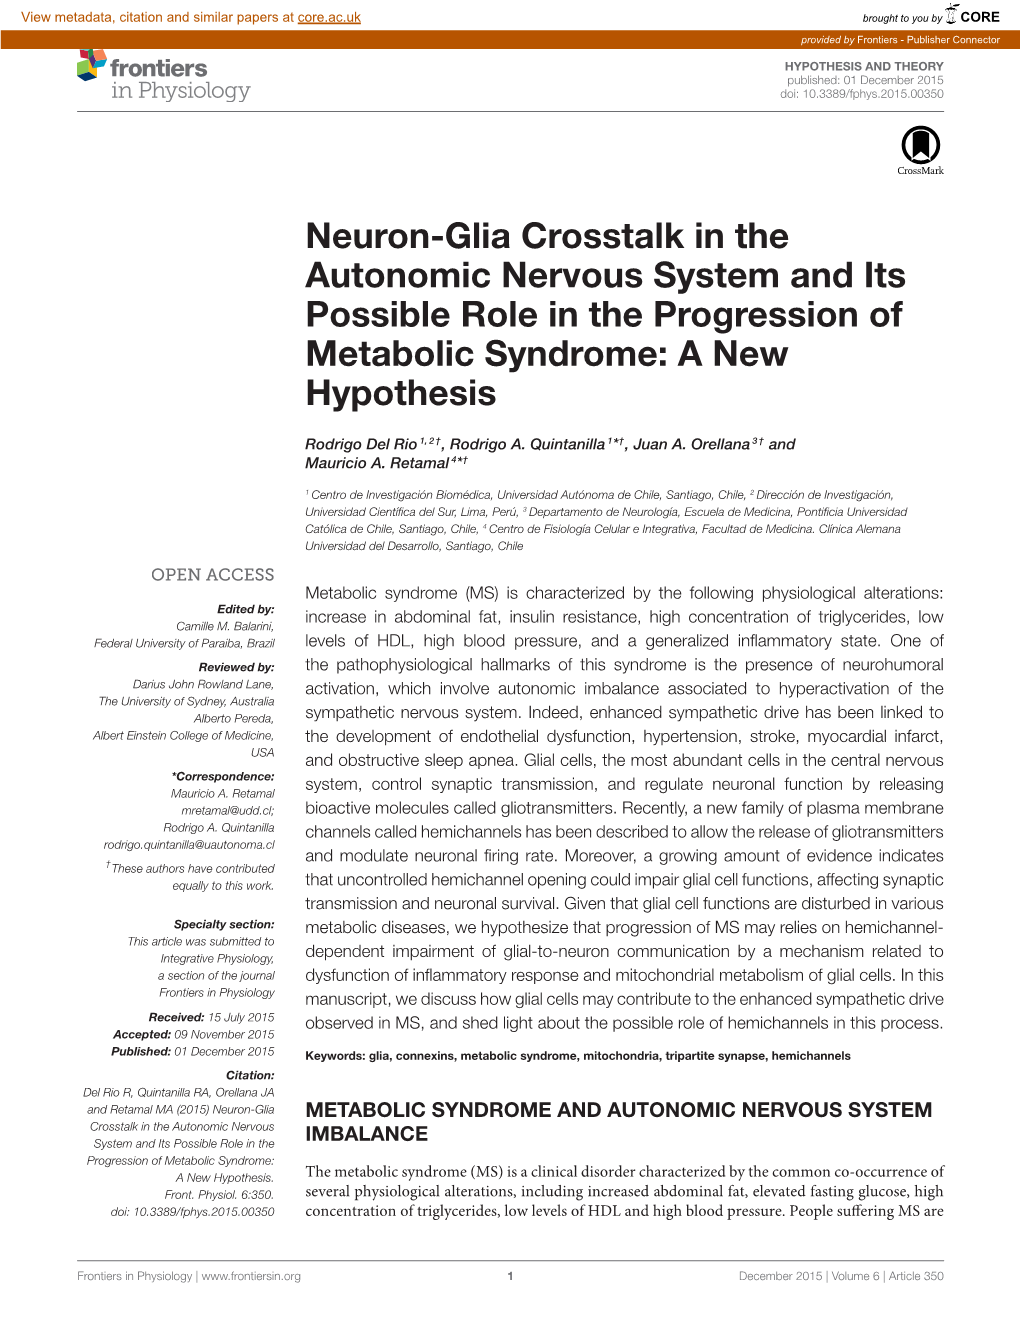 Neuron-Glia Crosstalk in the Autonomic Nervous System and Its Possible Role in the Progression of Metabolic Syndrome: a New Hypothesis